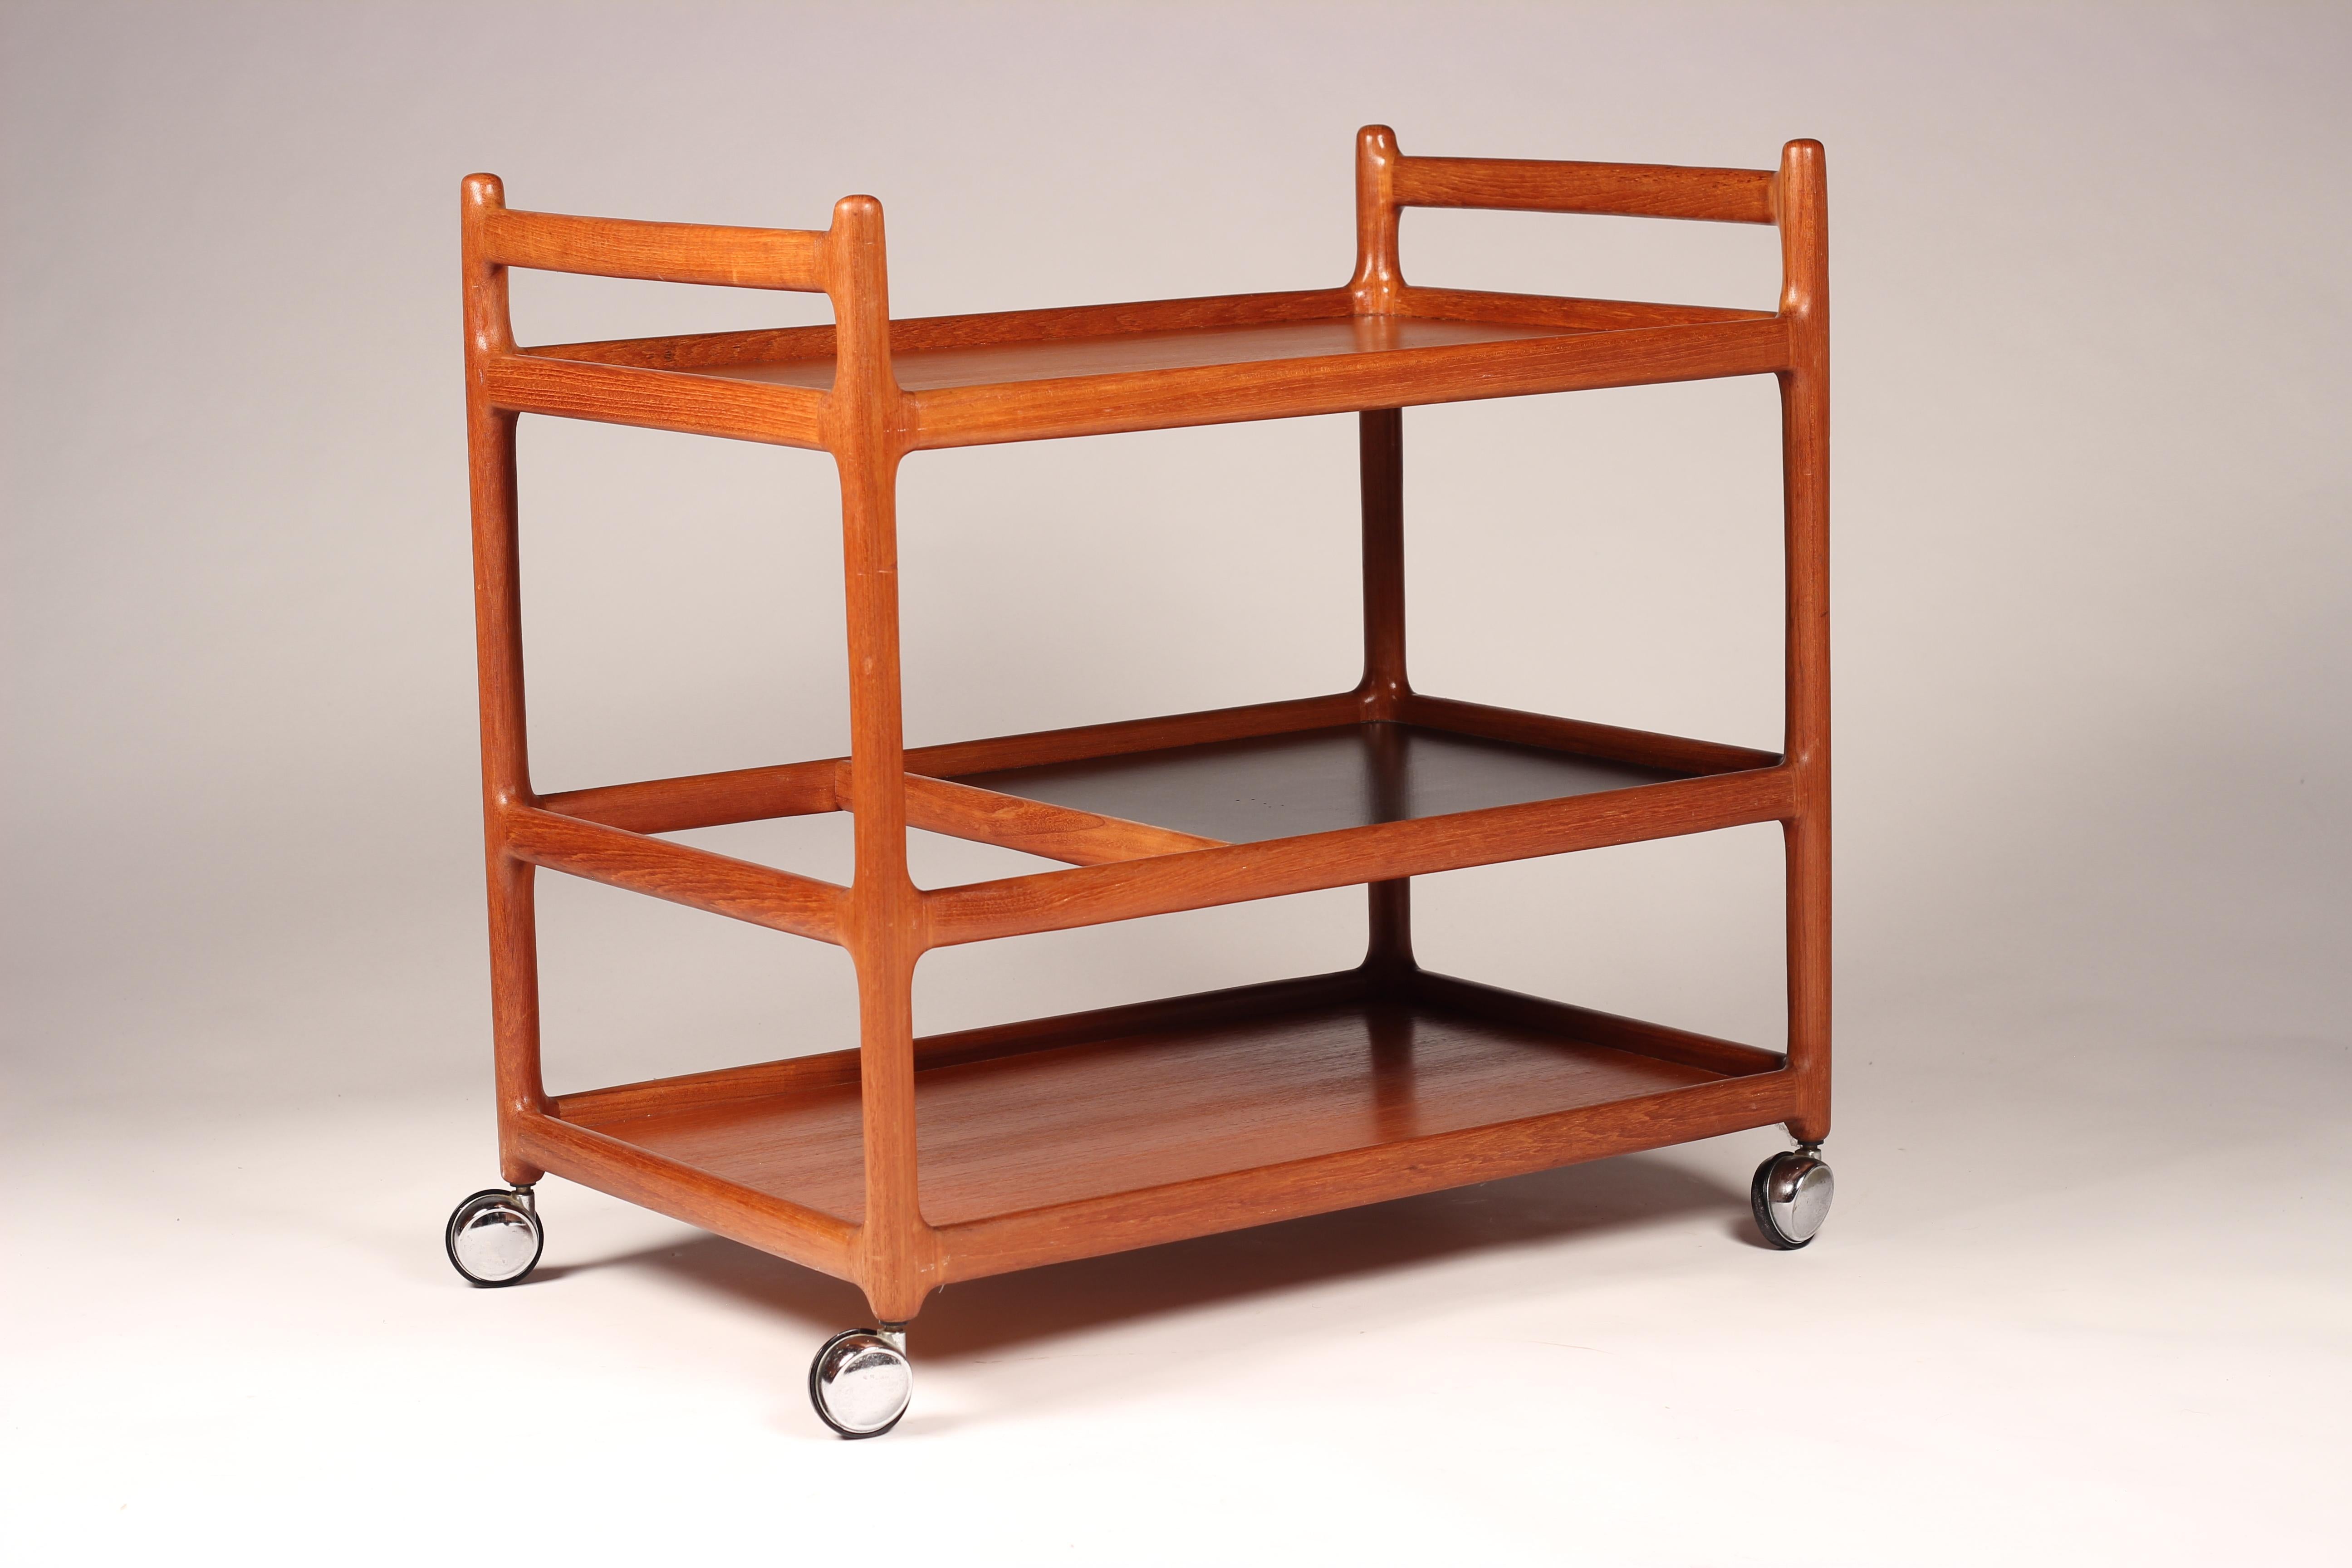 Elegant and simply designed Danish bar cart on gliding wheels. Beautifully detailed wooden joints and structure that encourages you to use all three levels, the middle one not only leaves one end for double height items, but also has a black